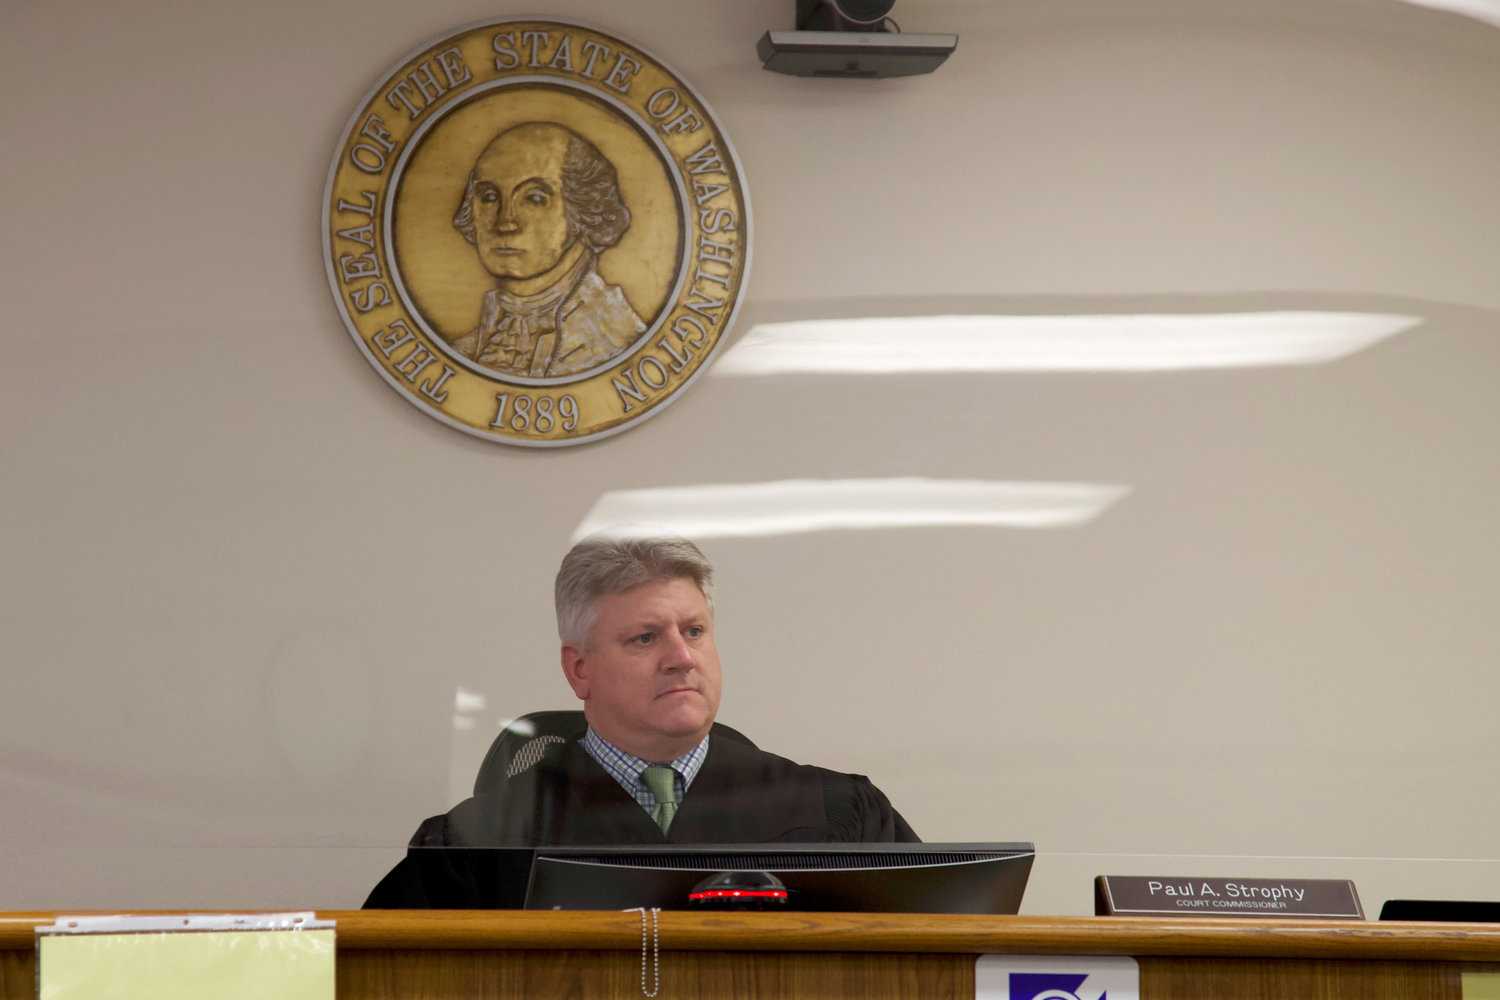 Lewis County Superior Court Commissioner Paul A. Strophy presides over preliminary hearings in Chehalis on Tuesday.